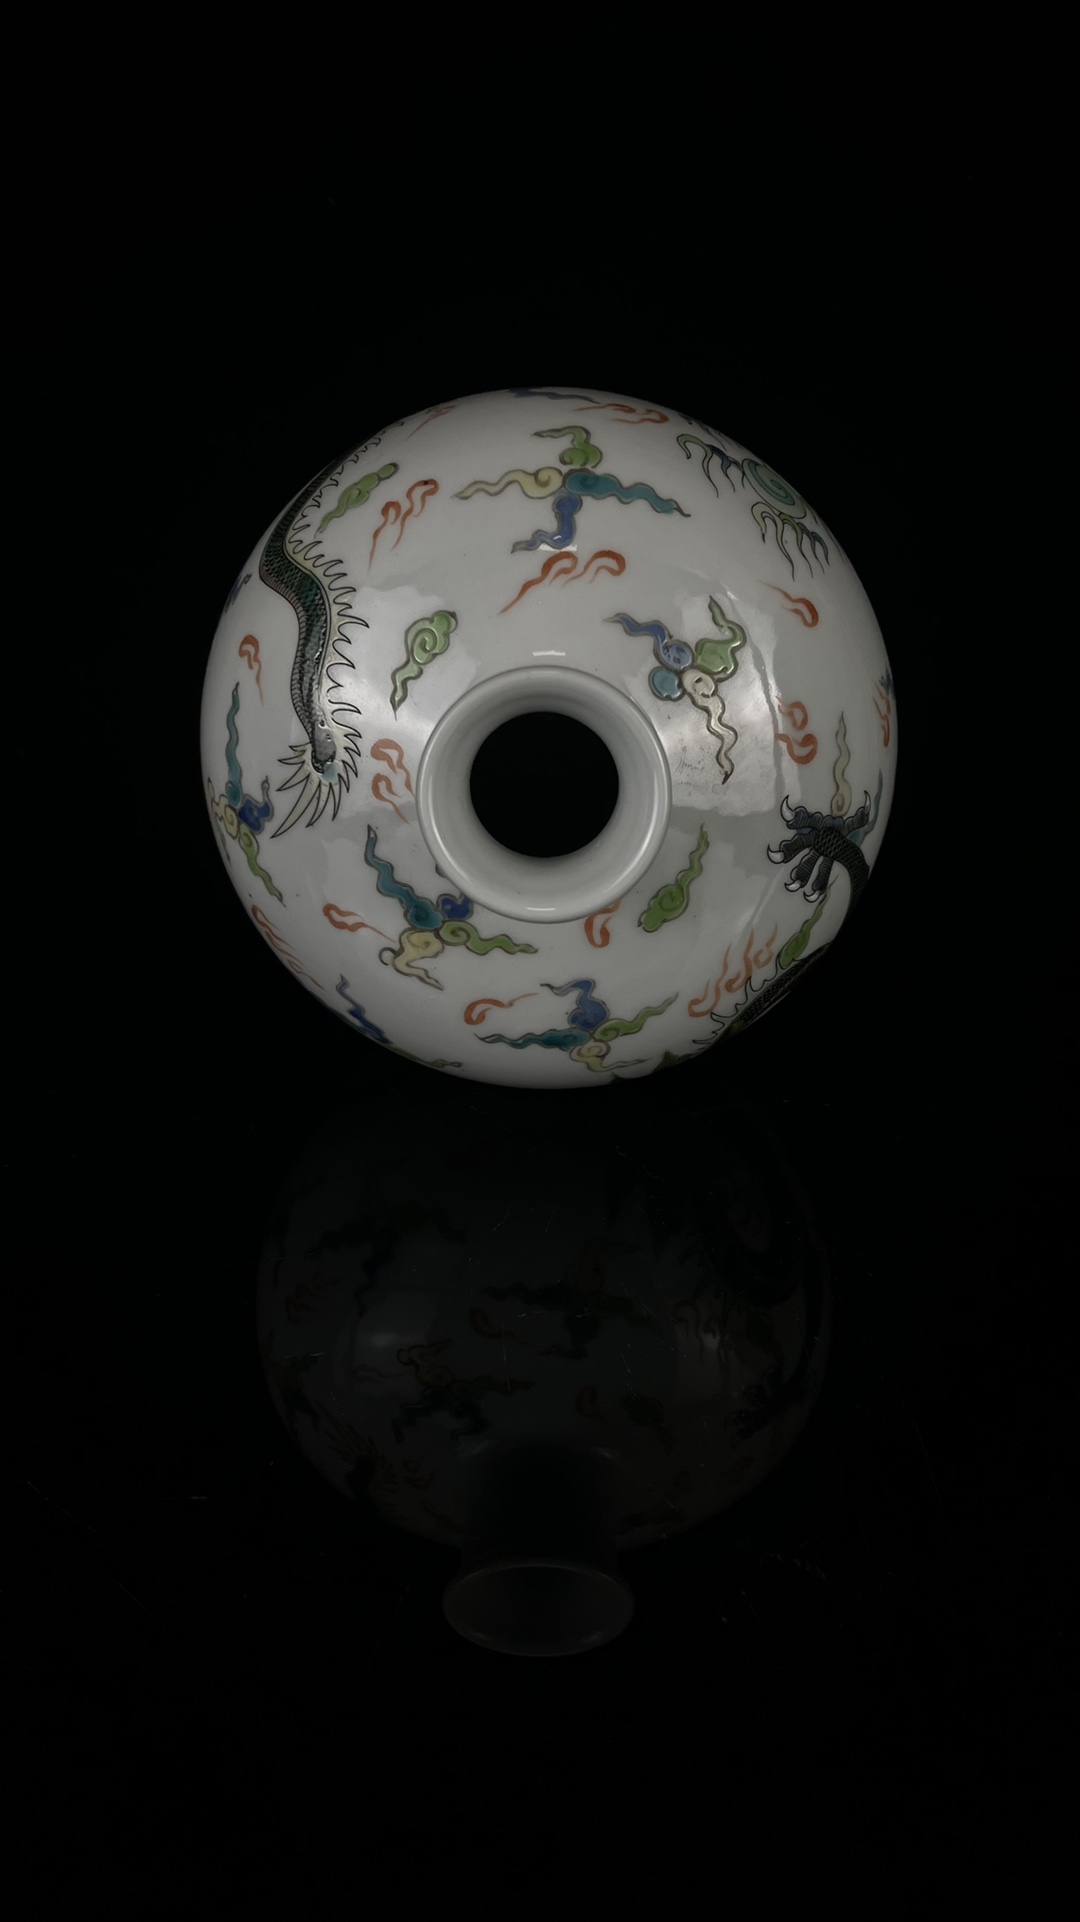 Five-color porcelain plate and dragon plum vase made in the Kangxi period of the Qing Dynasty - Image 7 of 8